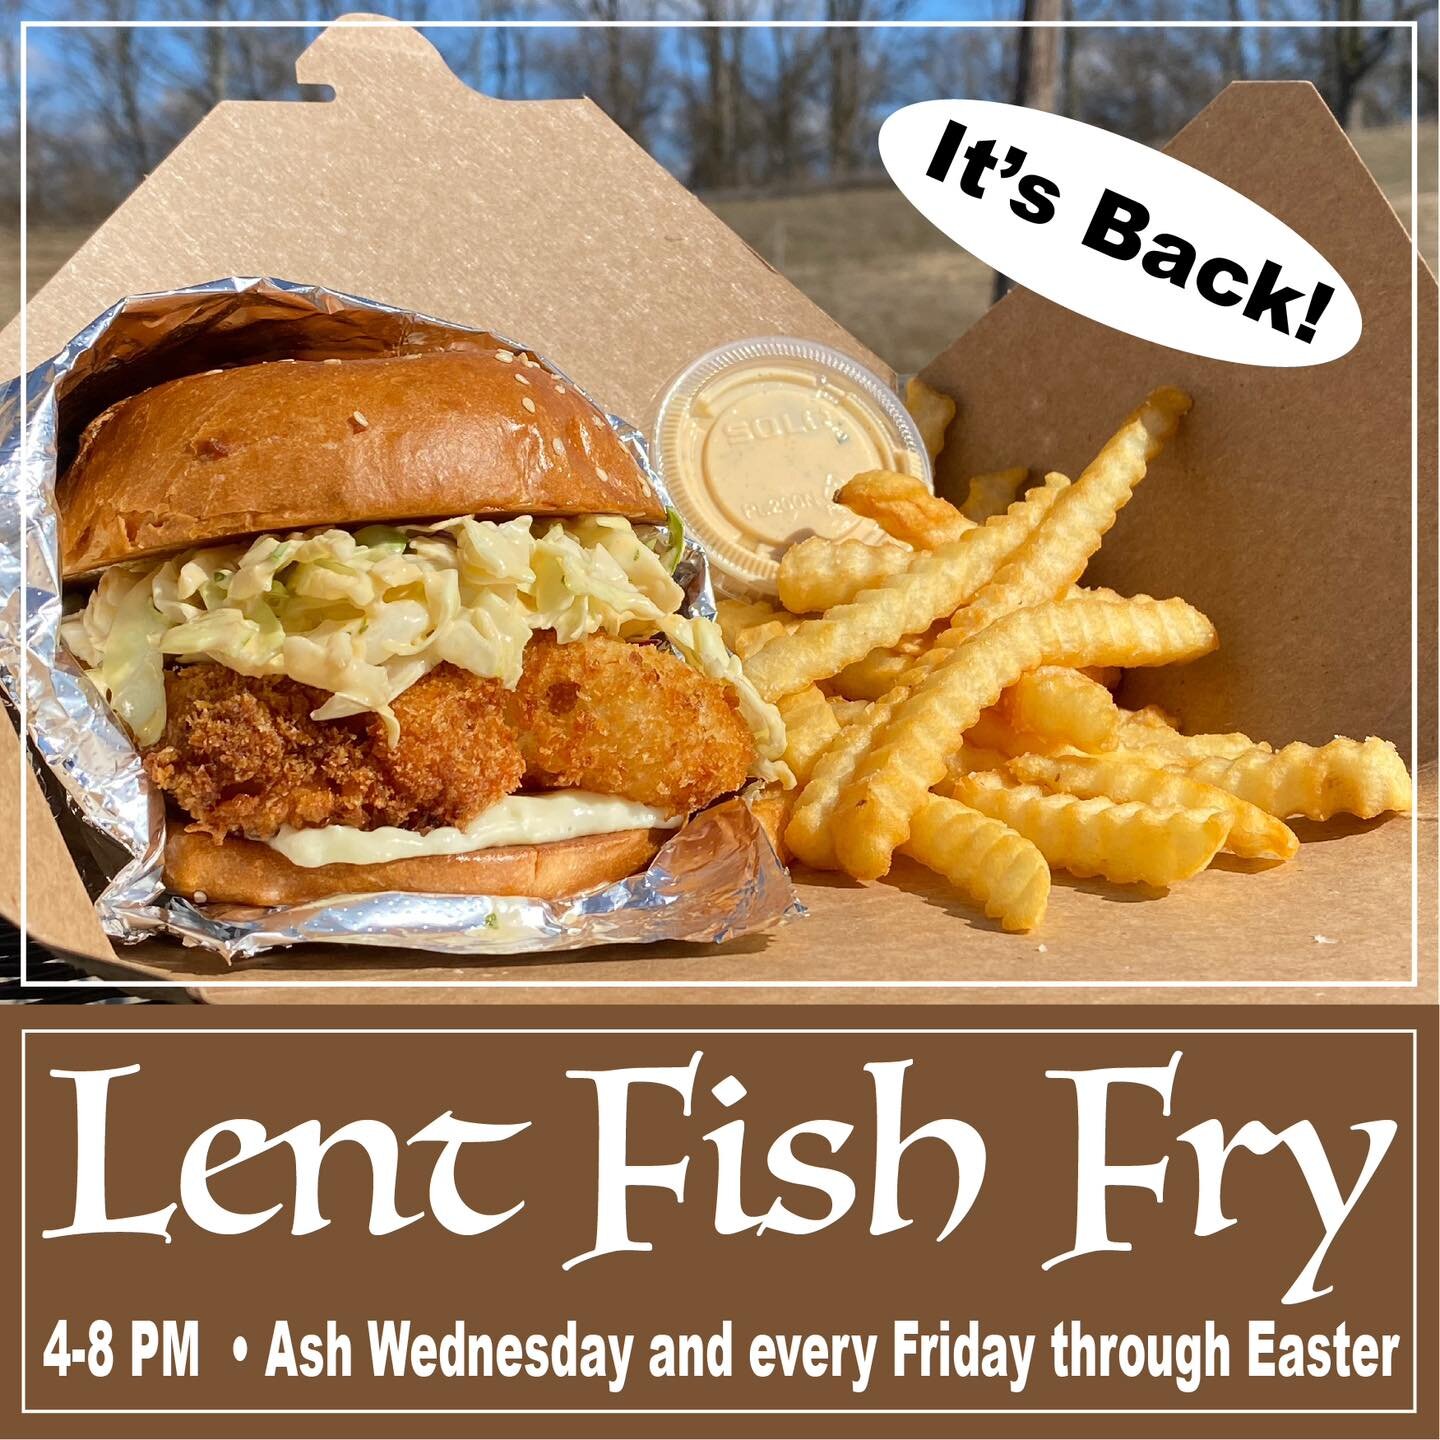 Chloe's Eatery fish sandwiches are back!  4-8 PM Ash Wednesday and every Friday till Easter!  Like previous years if they have fish left on Saturday you might be able to grab one then.

So come and enjoy the best fish fry on the Westside!  Get a beer